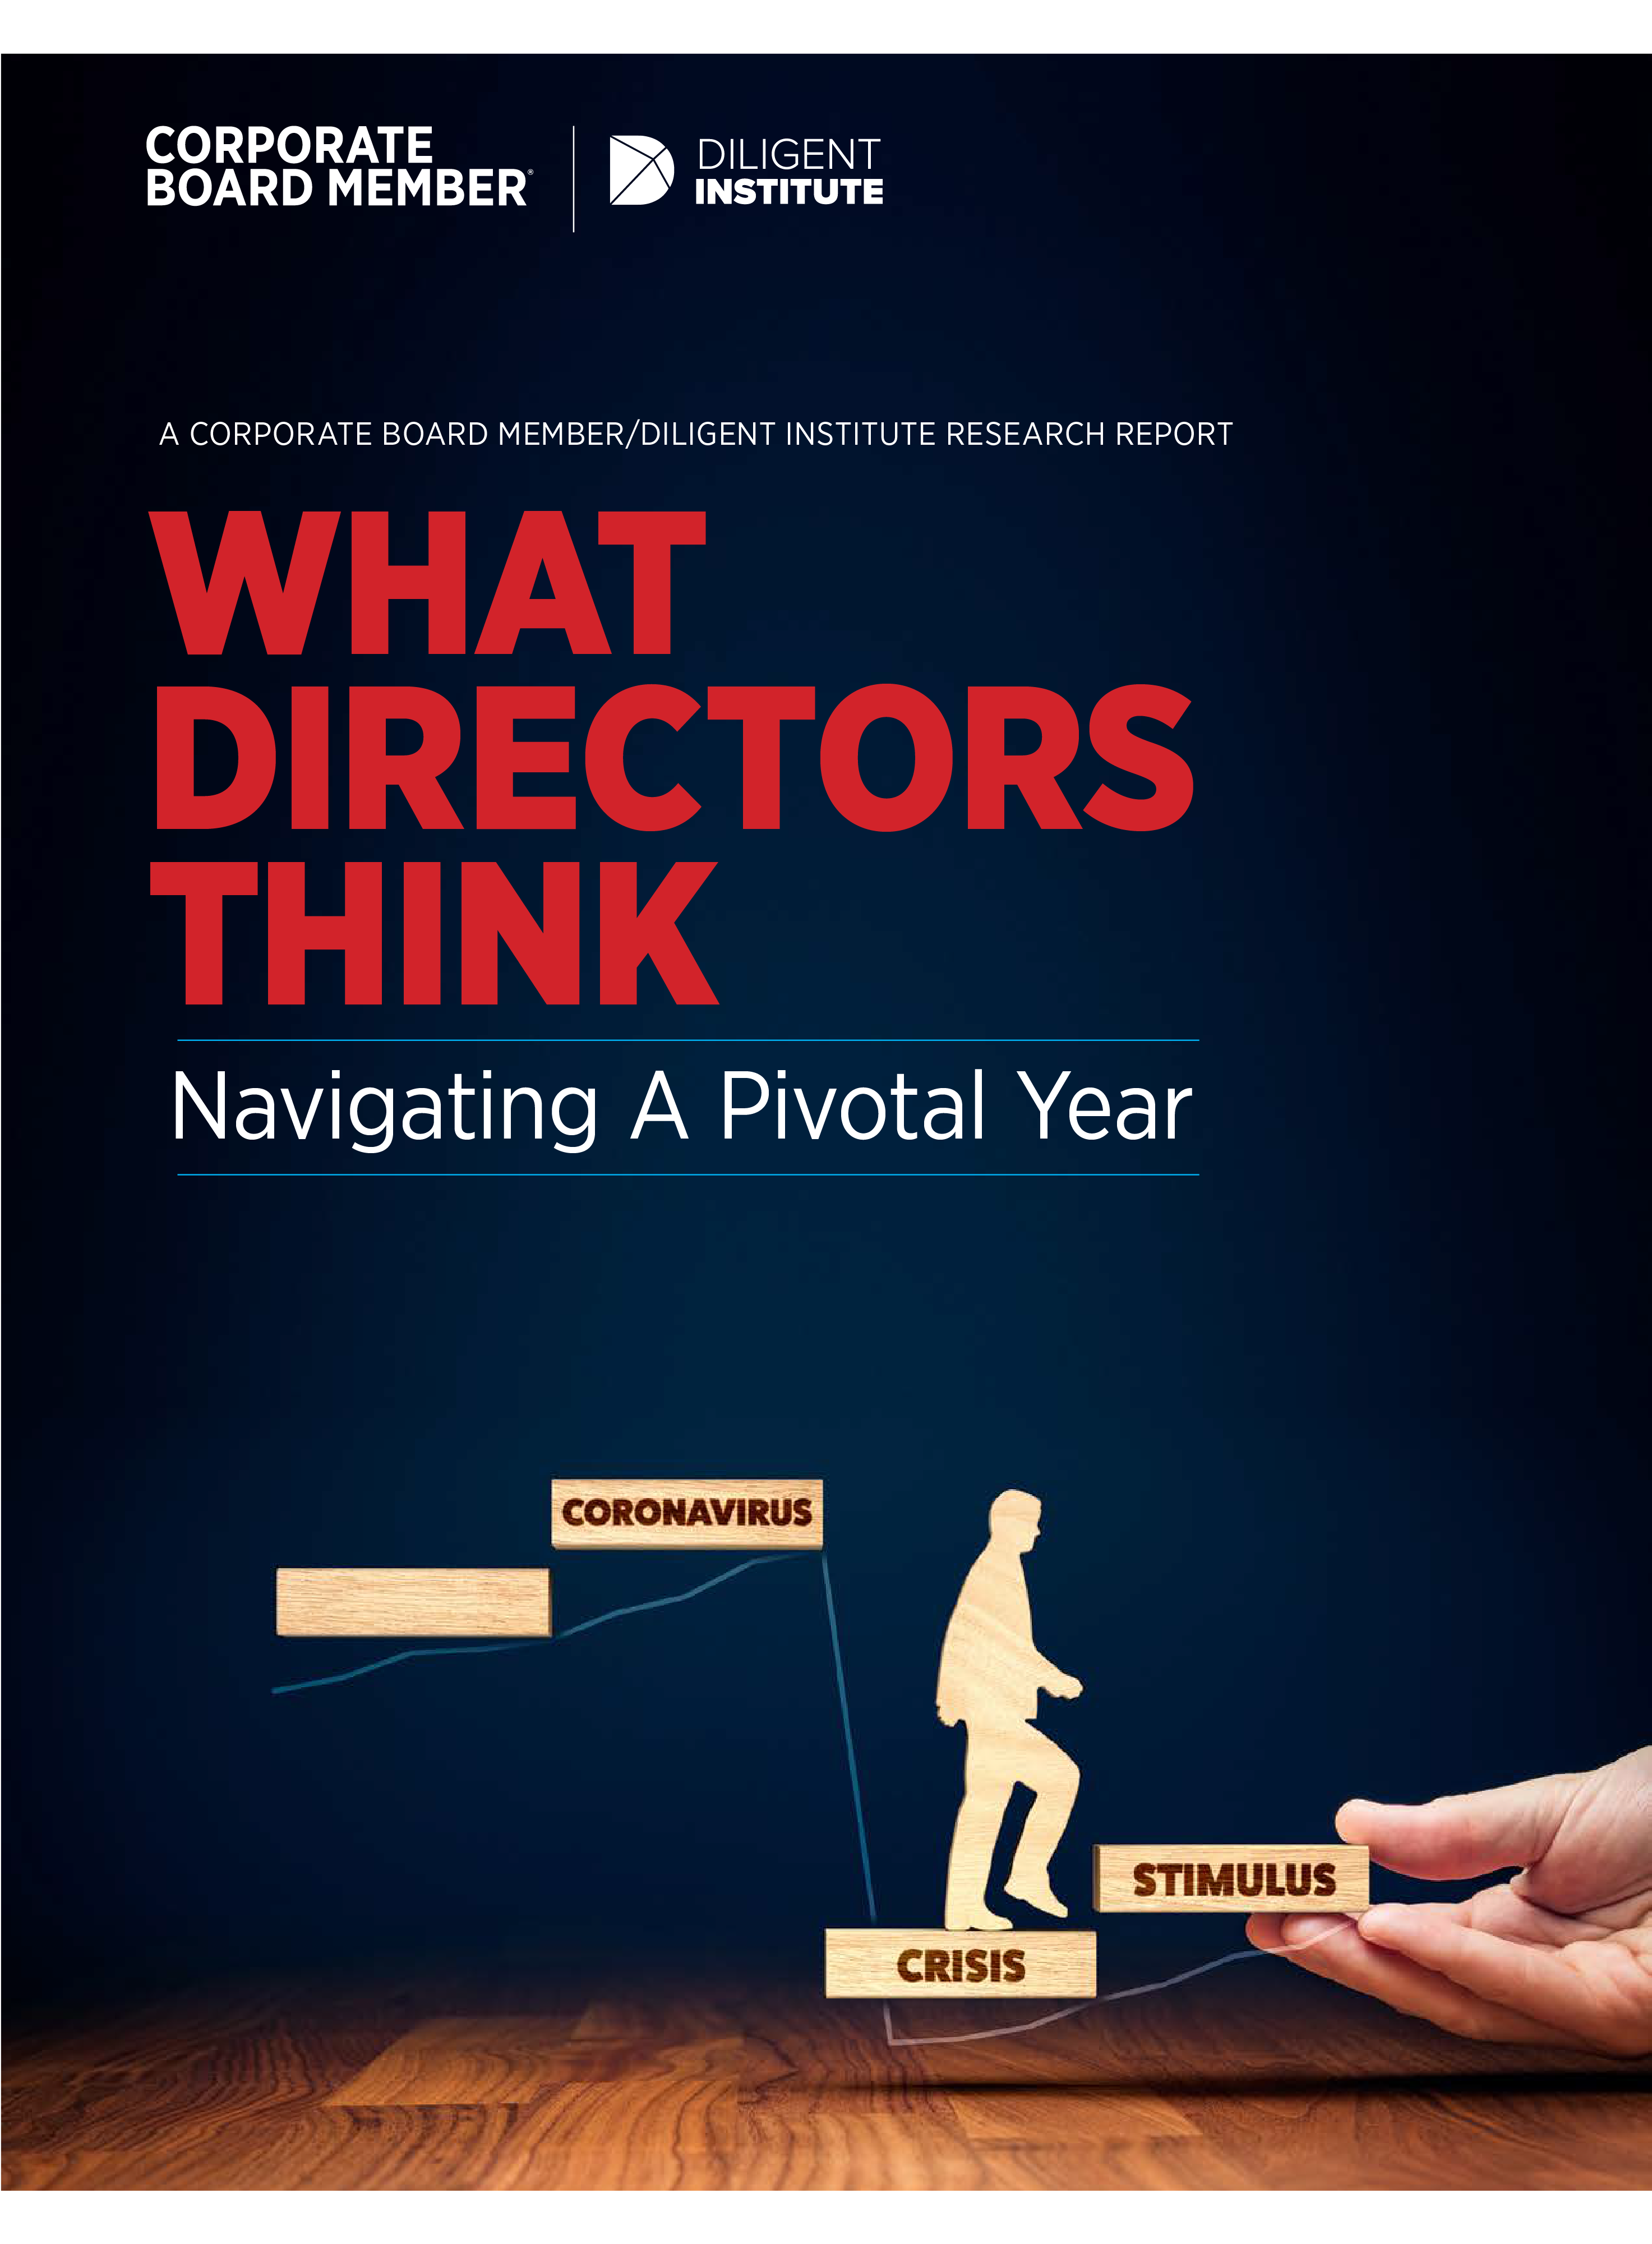 What Directors Think with Corporate Board Member: Navigating a Pivotal Year report